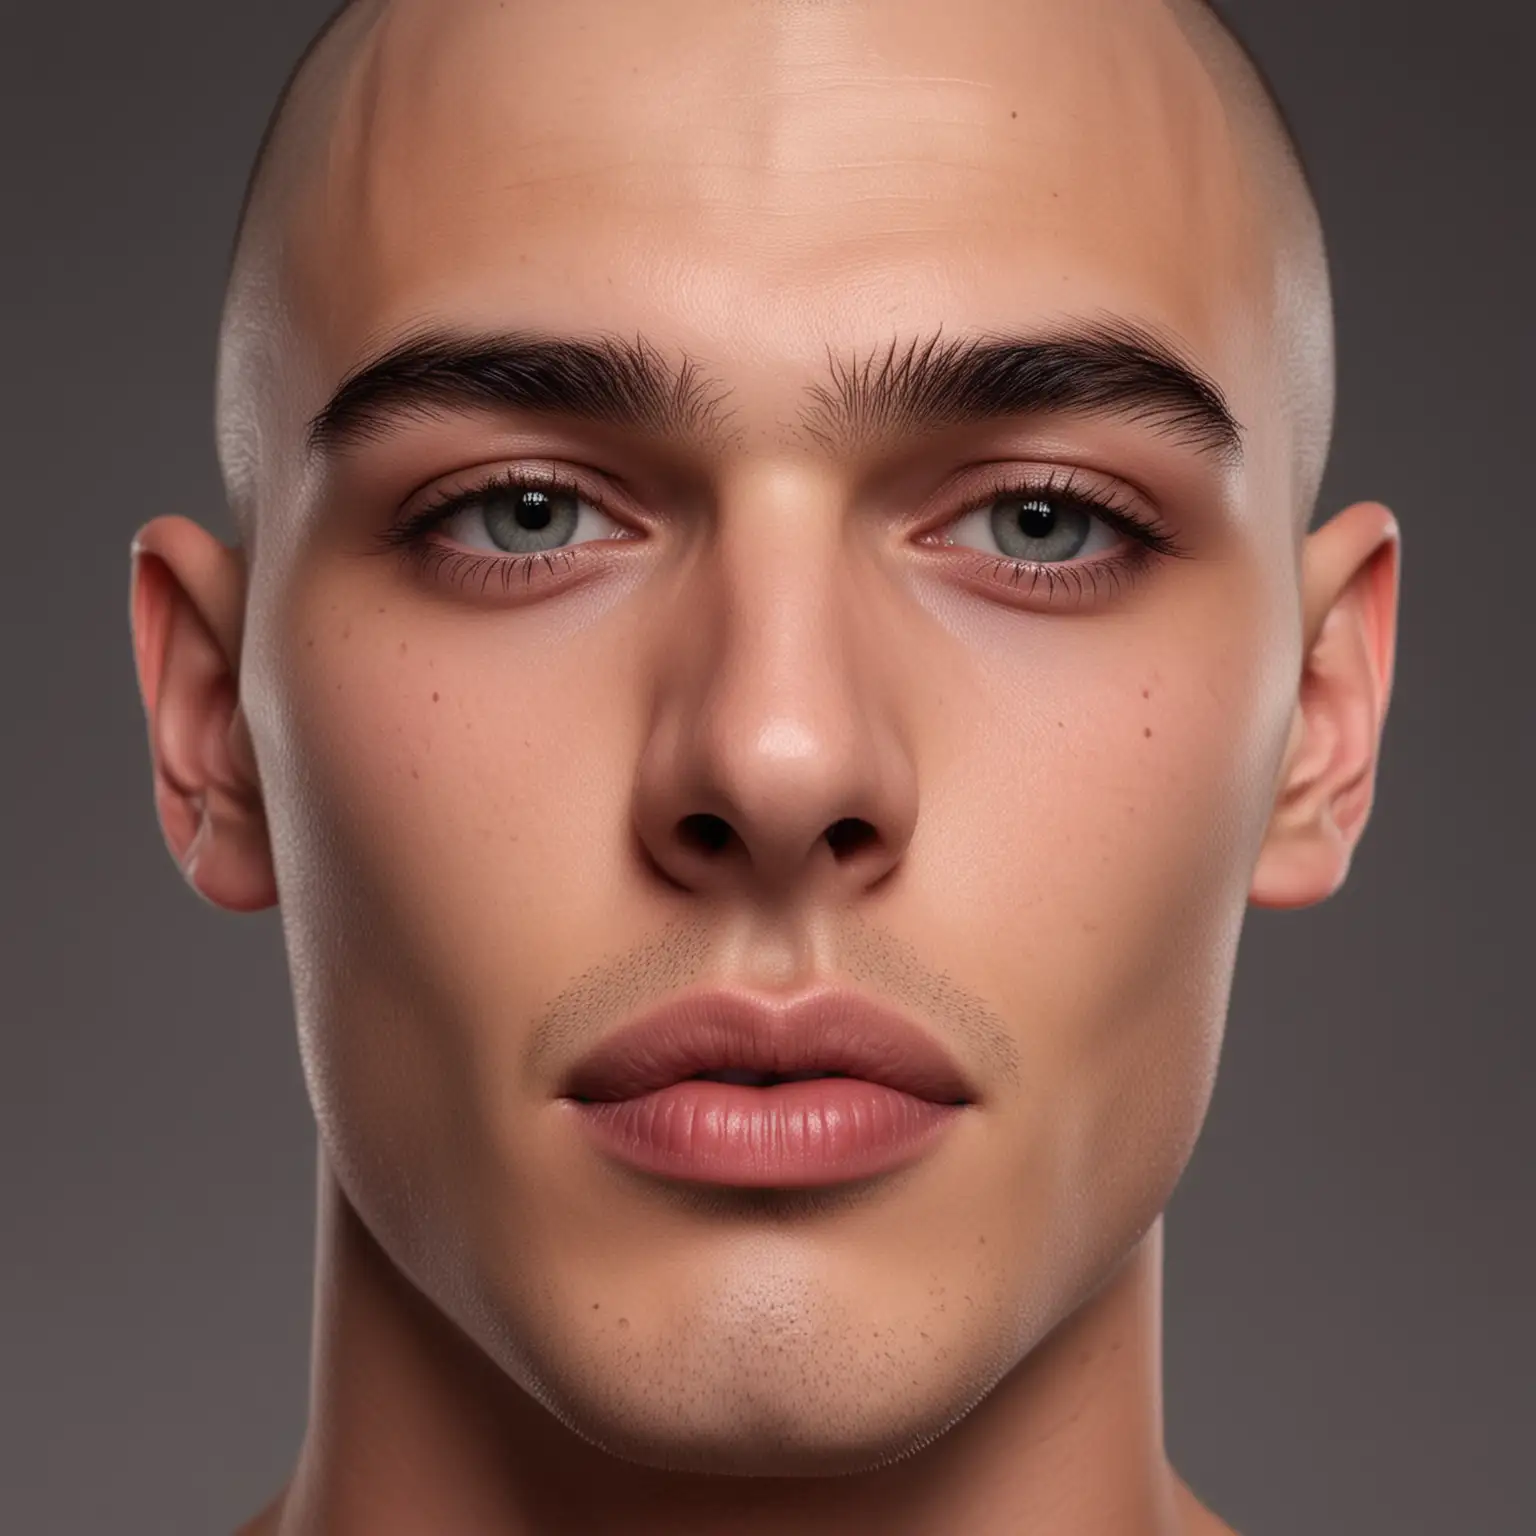 22 yo handsome male model, shaved, symmetric face, handsome, huge lips, thick brows, perfect, HD, 8K, skin texture, square jaw, front view, bald,